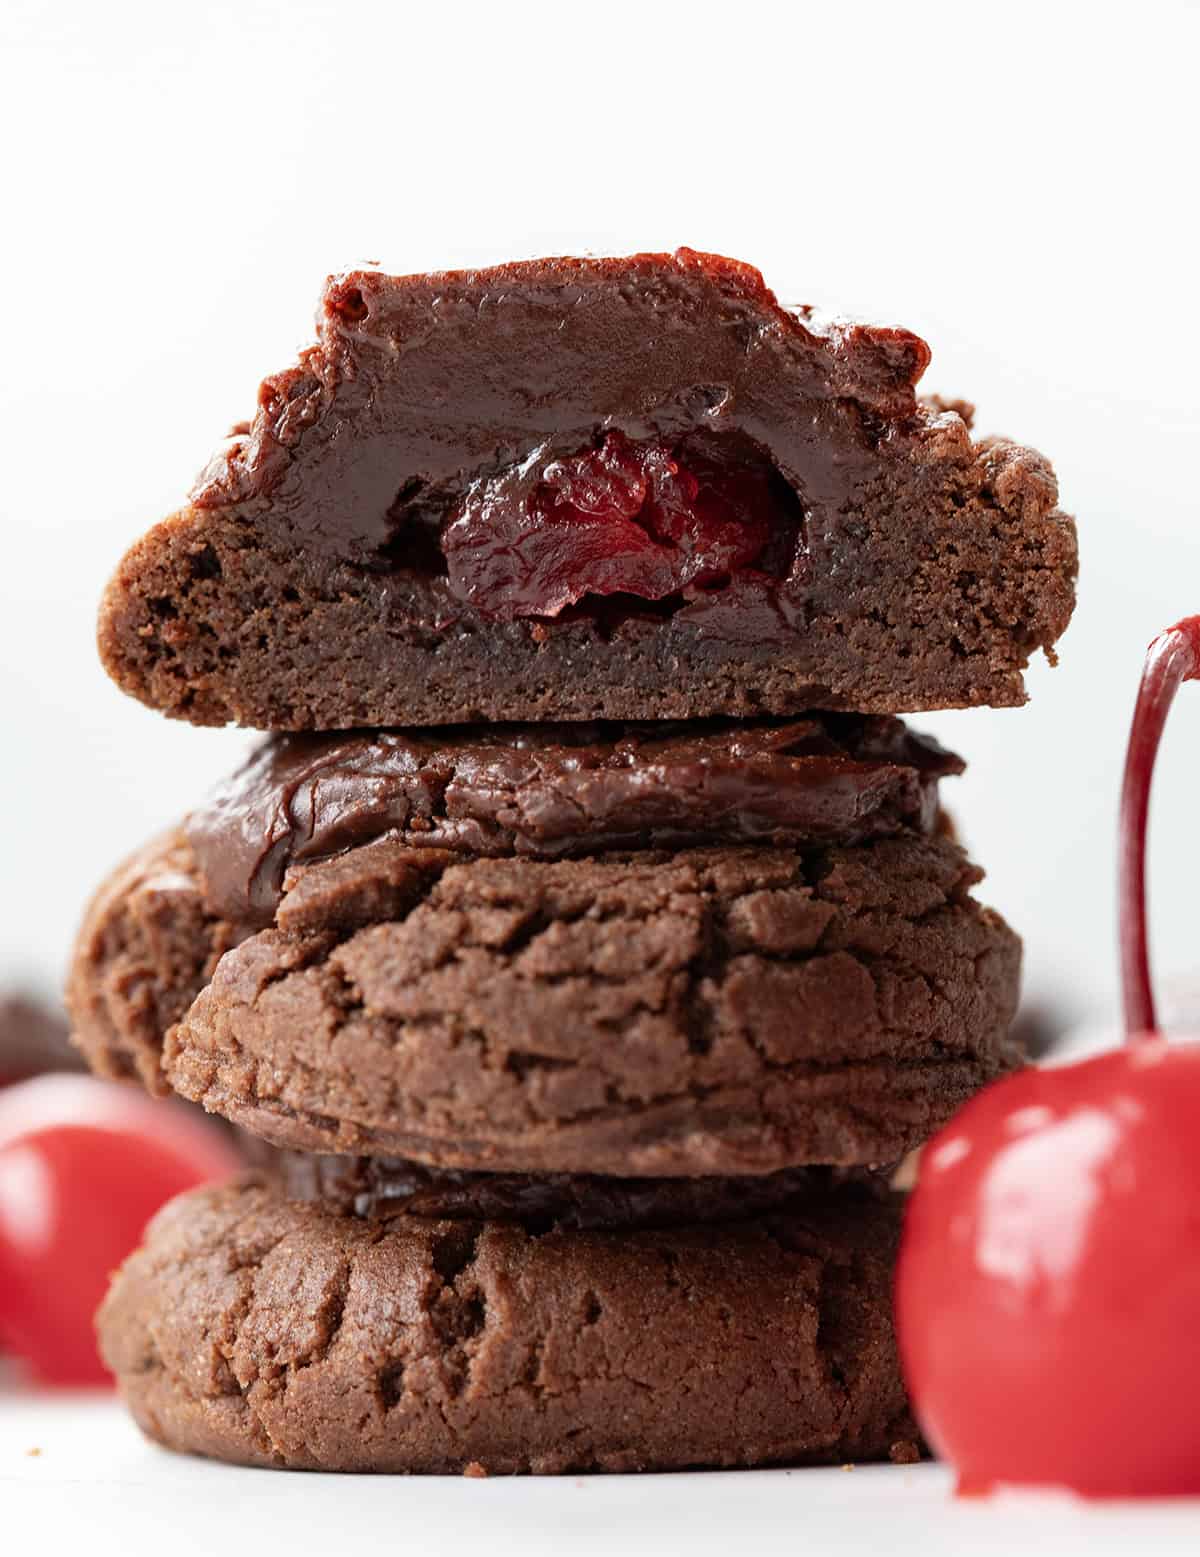 Stack of Chocolate Covered Cherry Cookies with top cookie cut in half.